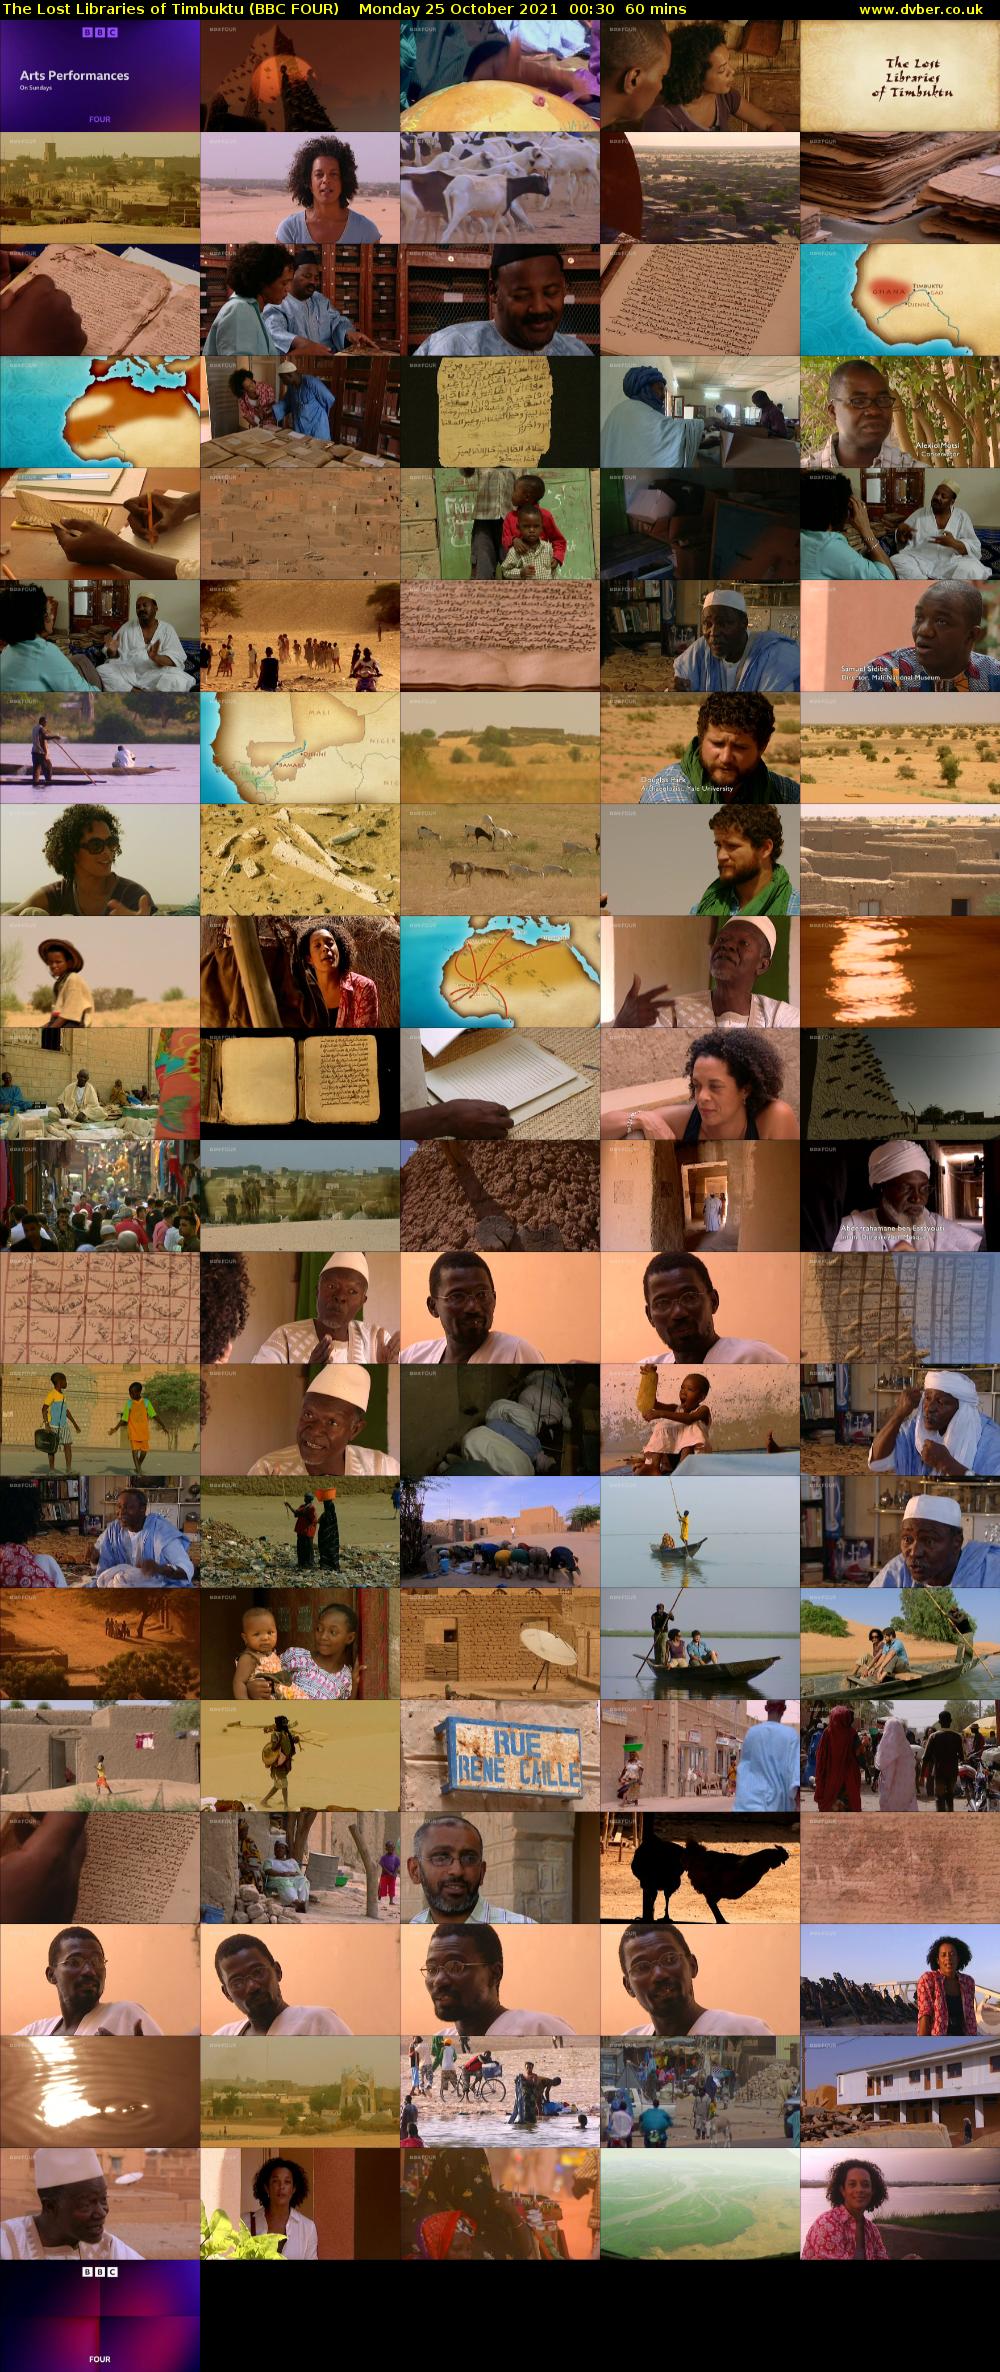 The Lost Libraries of Timbuktu (BBC FOUR) Monday 25 October 2021 00:30 - 01:30